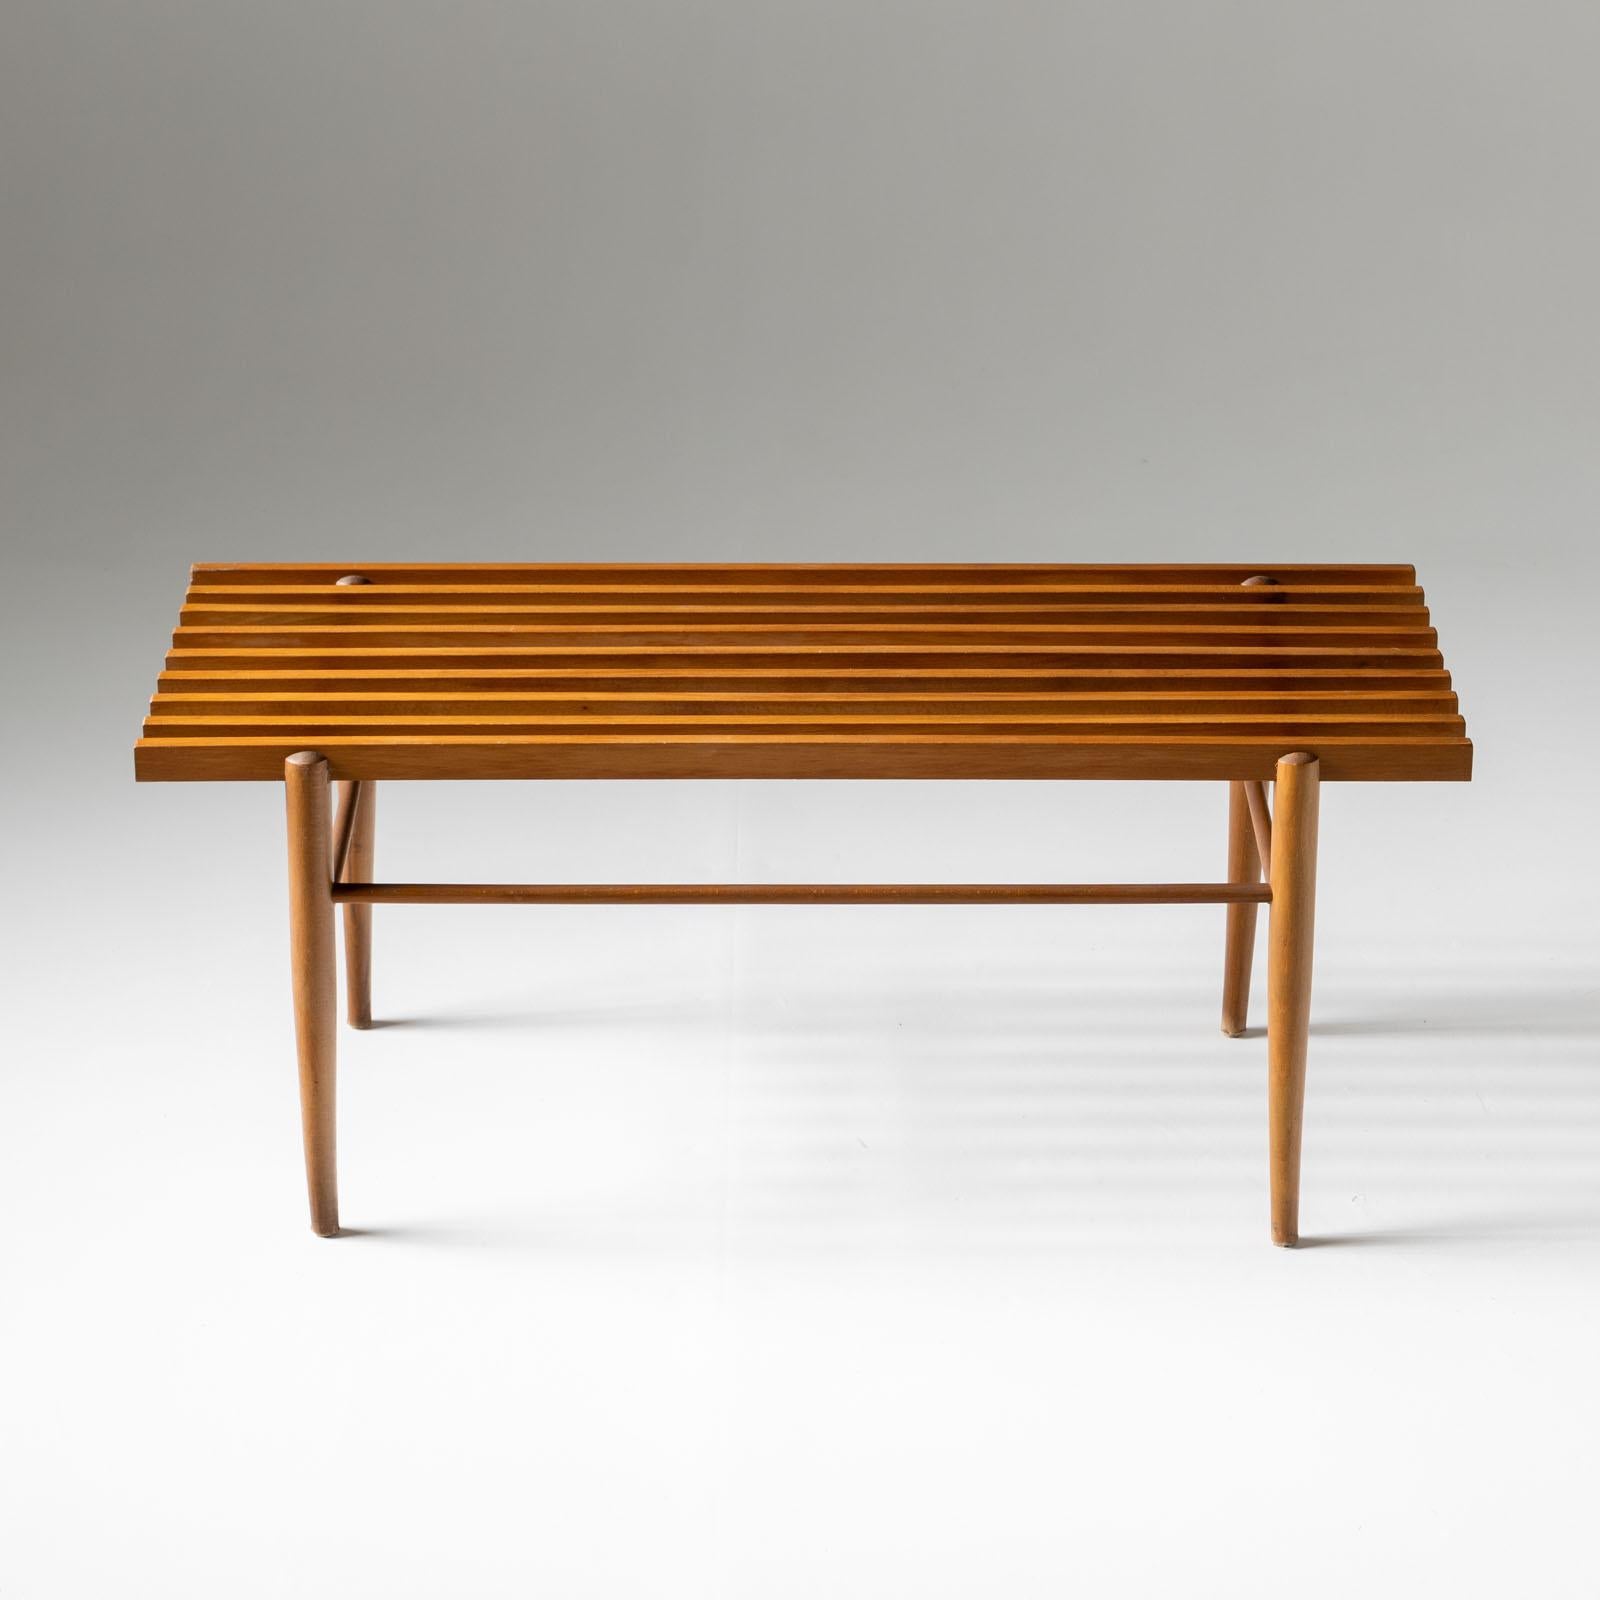 Slatted Wooden Benches, Italy Mid-20th Century In Good Condition For Sale In Greding, DE